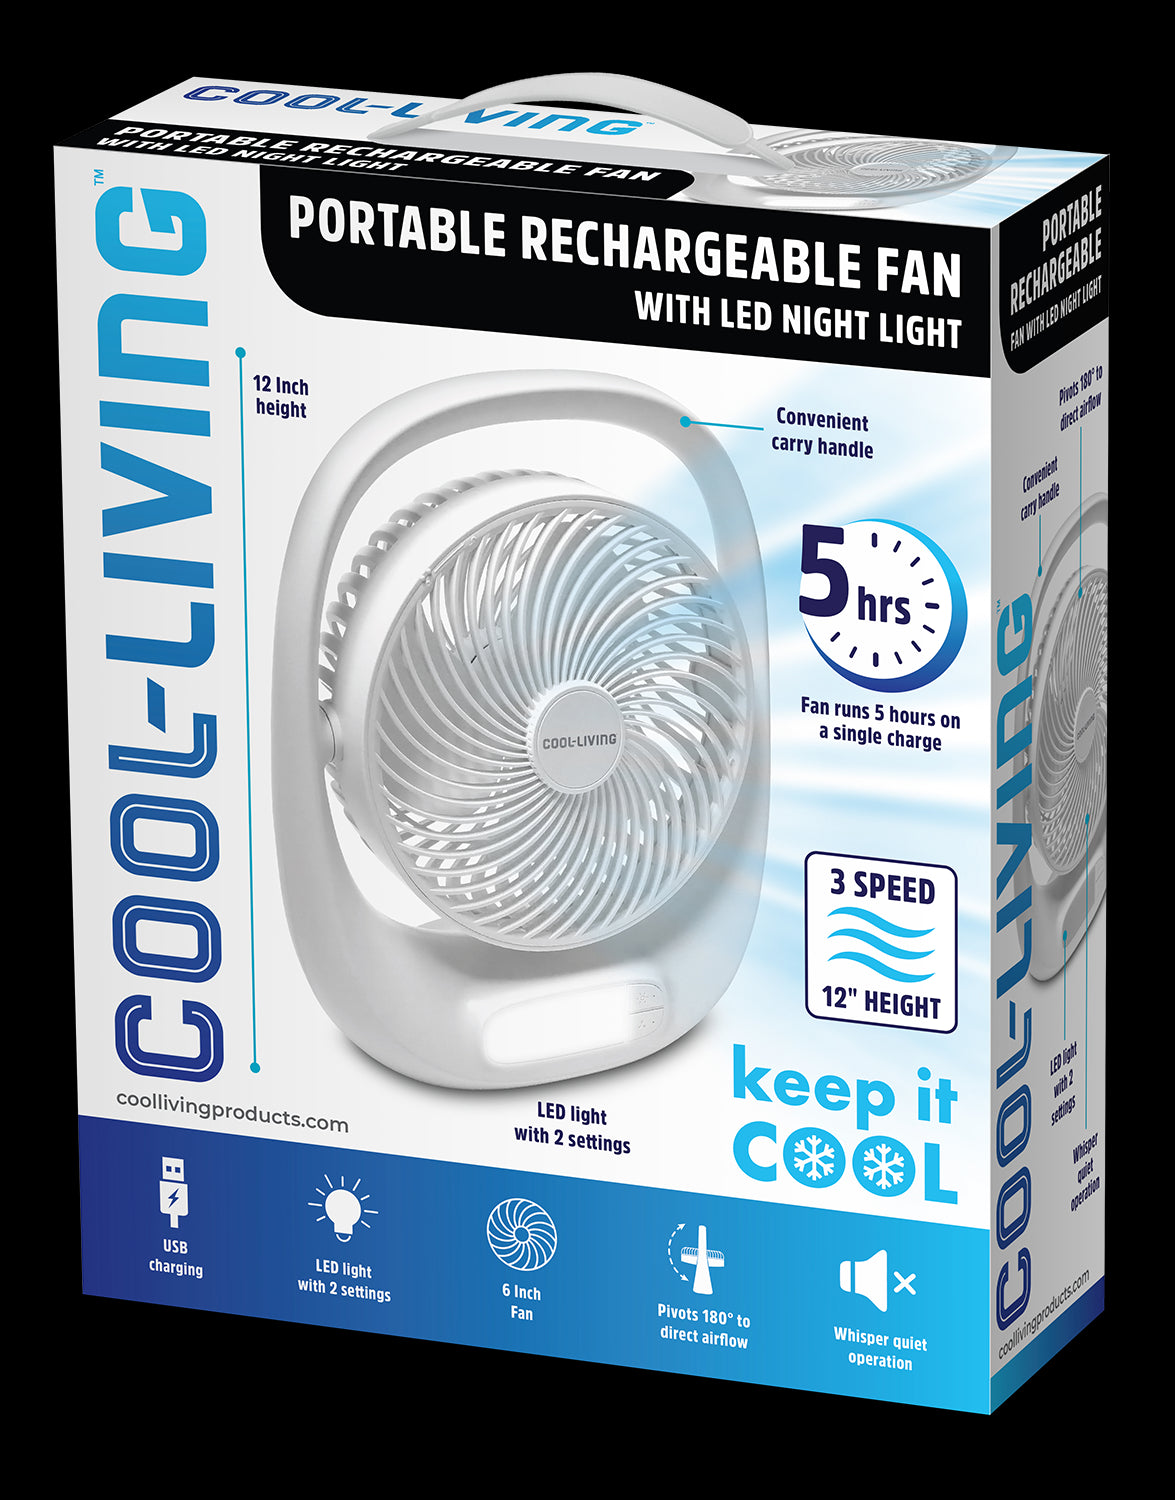 Portable Rechargeable Fan with LED Night Light, Asst Black, Silver, & White